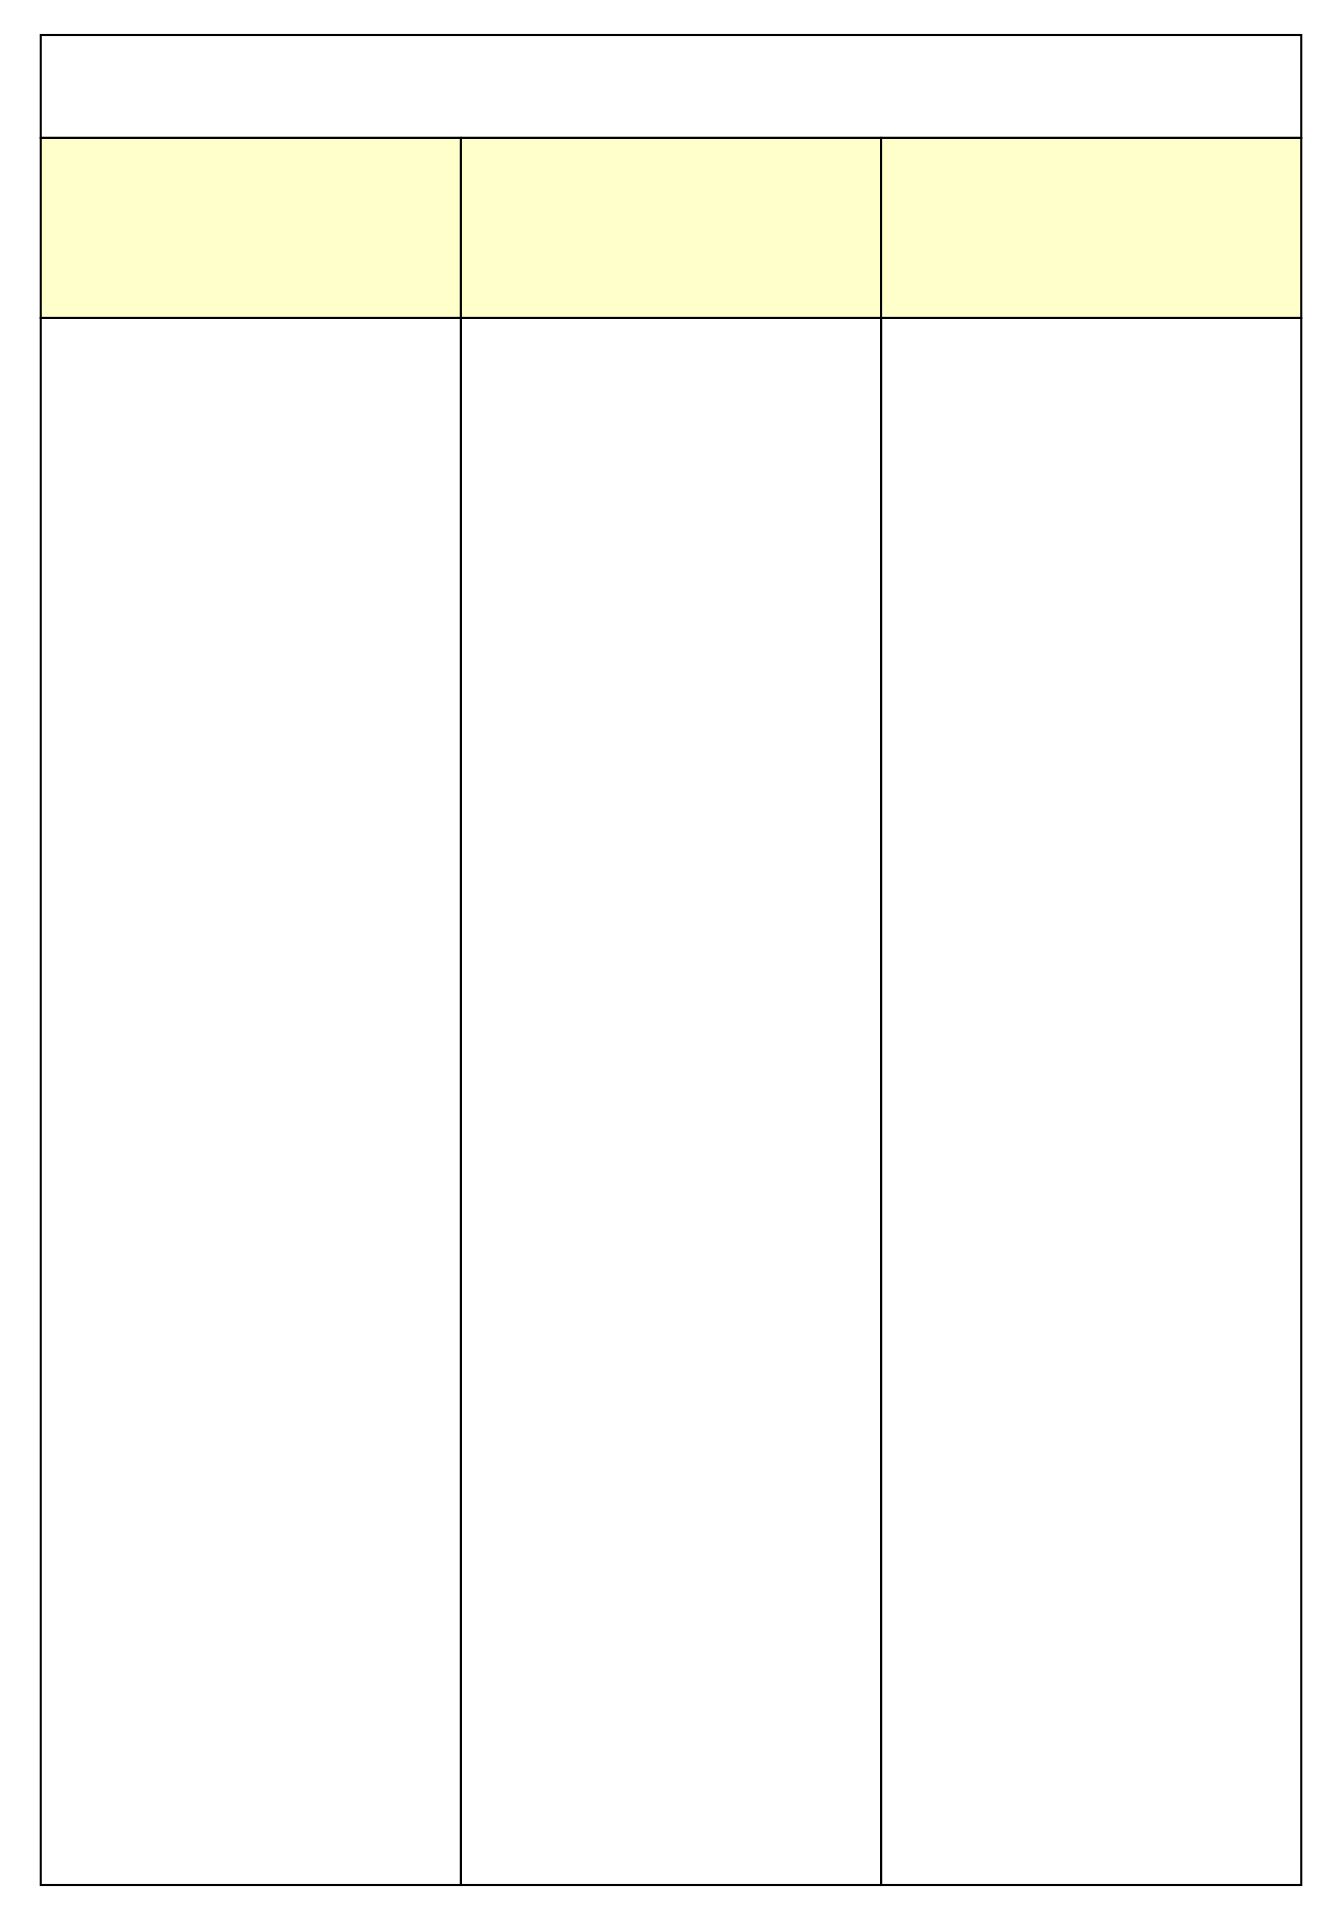 6 Best Images of 3 Column Chart Printable Templates Three Column